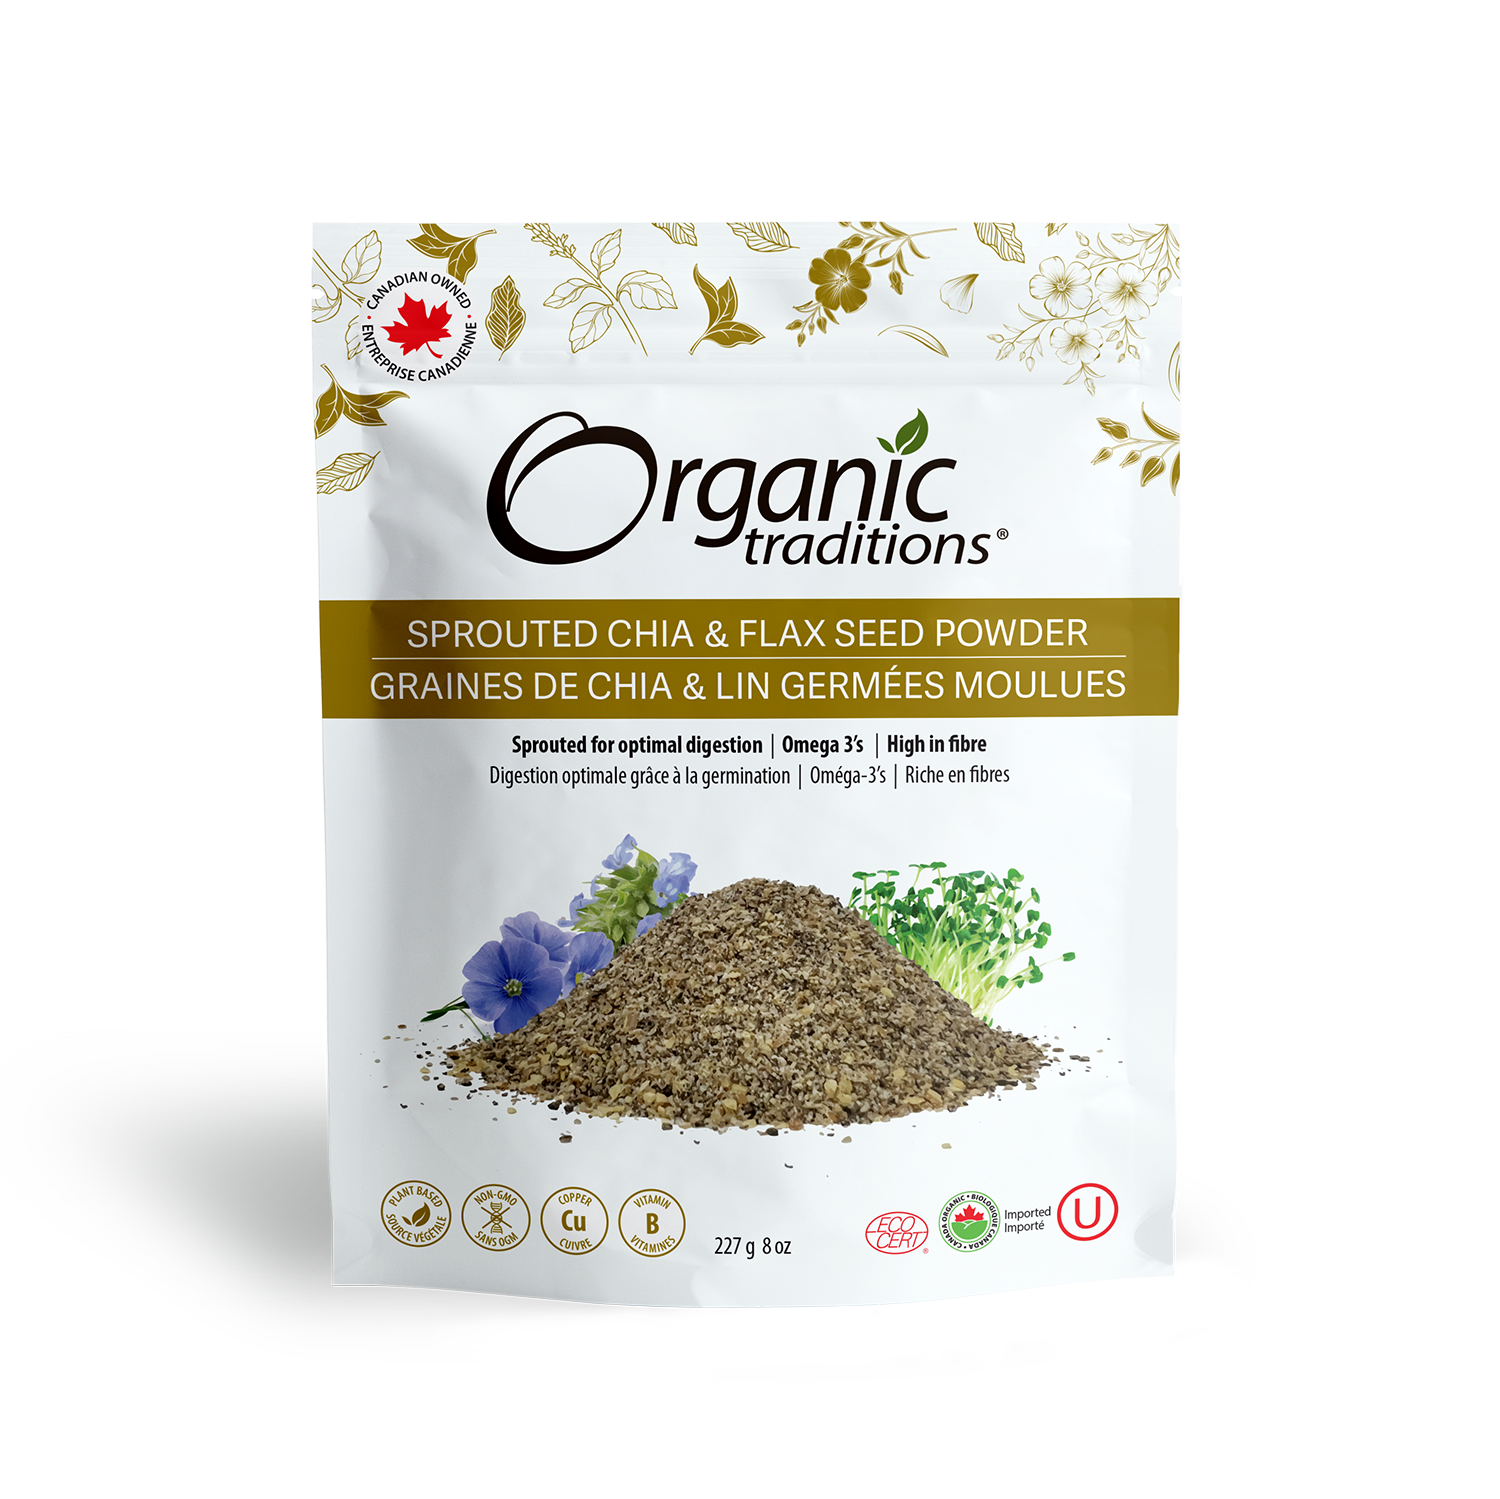 organic traditions sprouted chia flax powder front of bag image